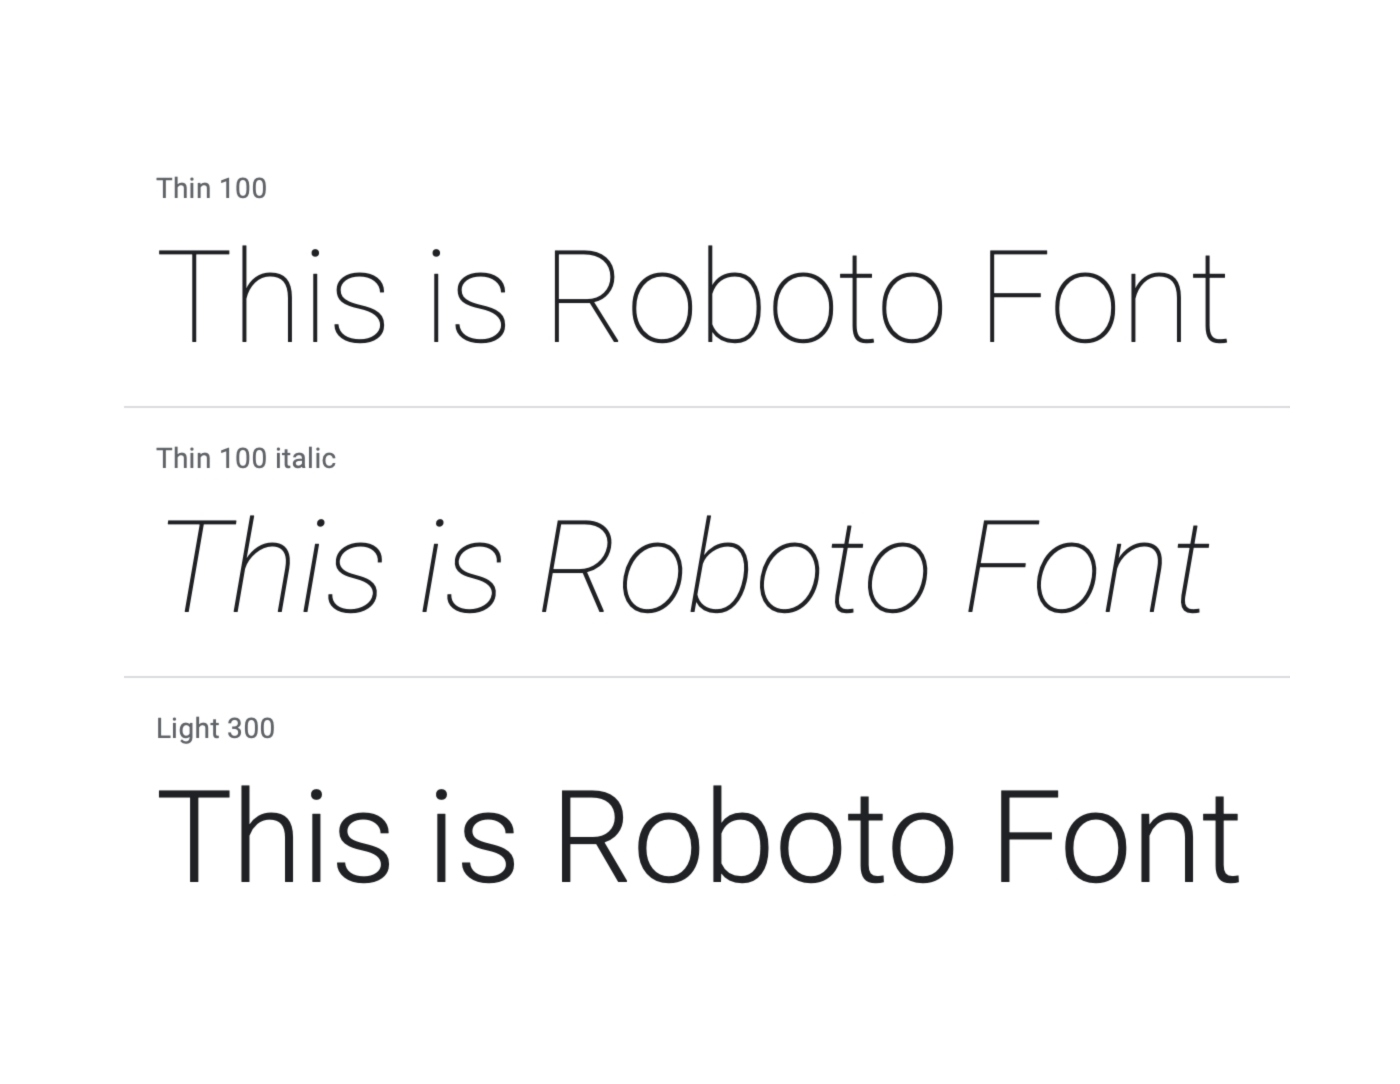 Roboto font family. Image by Material Design